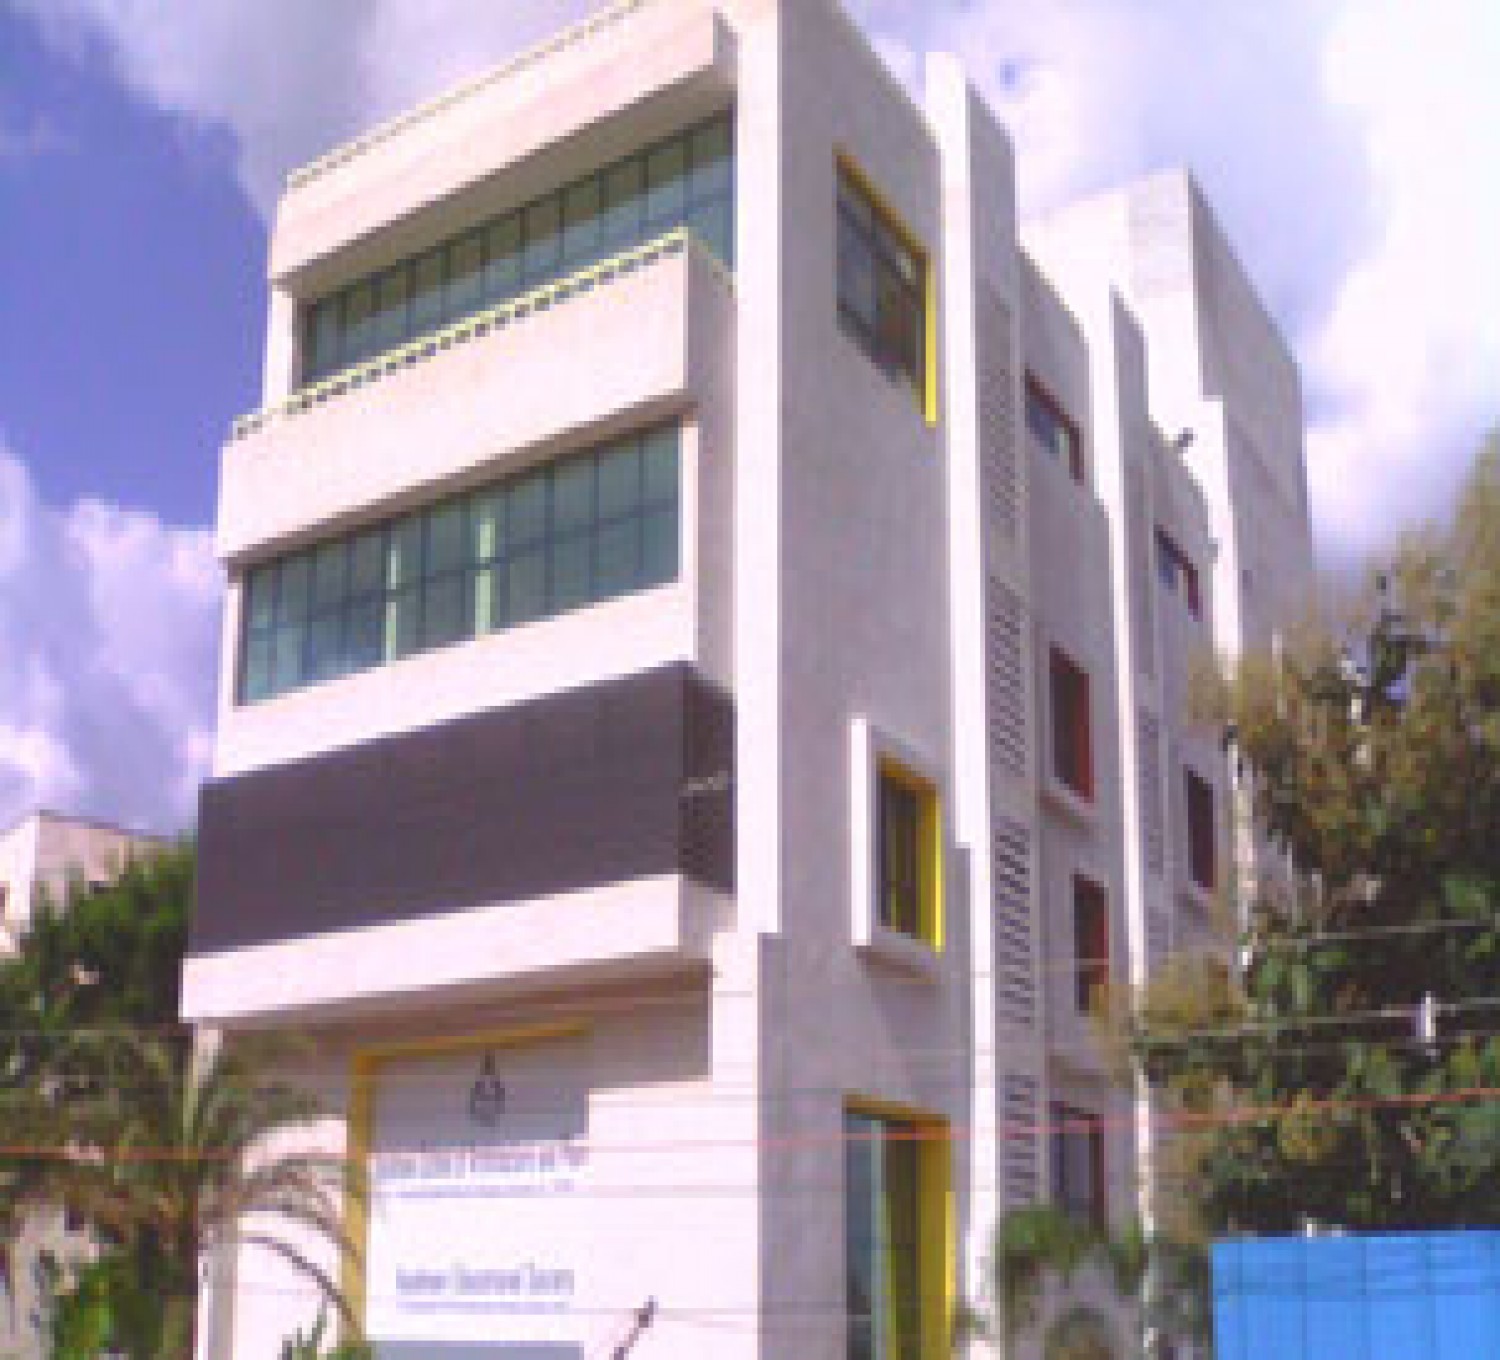 Vaishnavi School of Architecture and Planning-cover